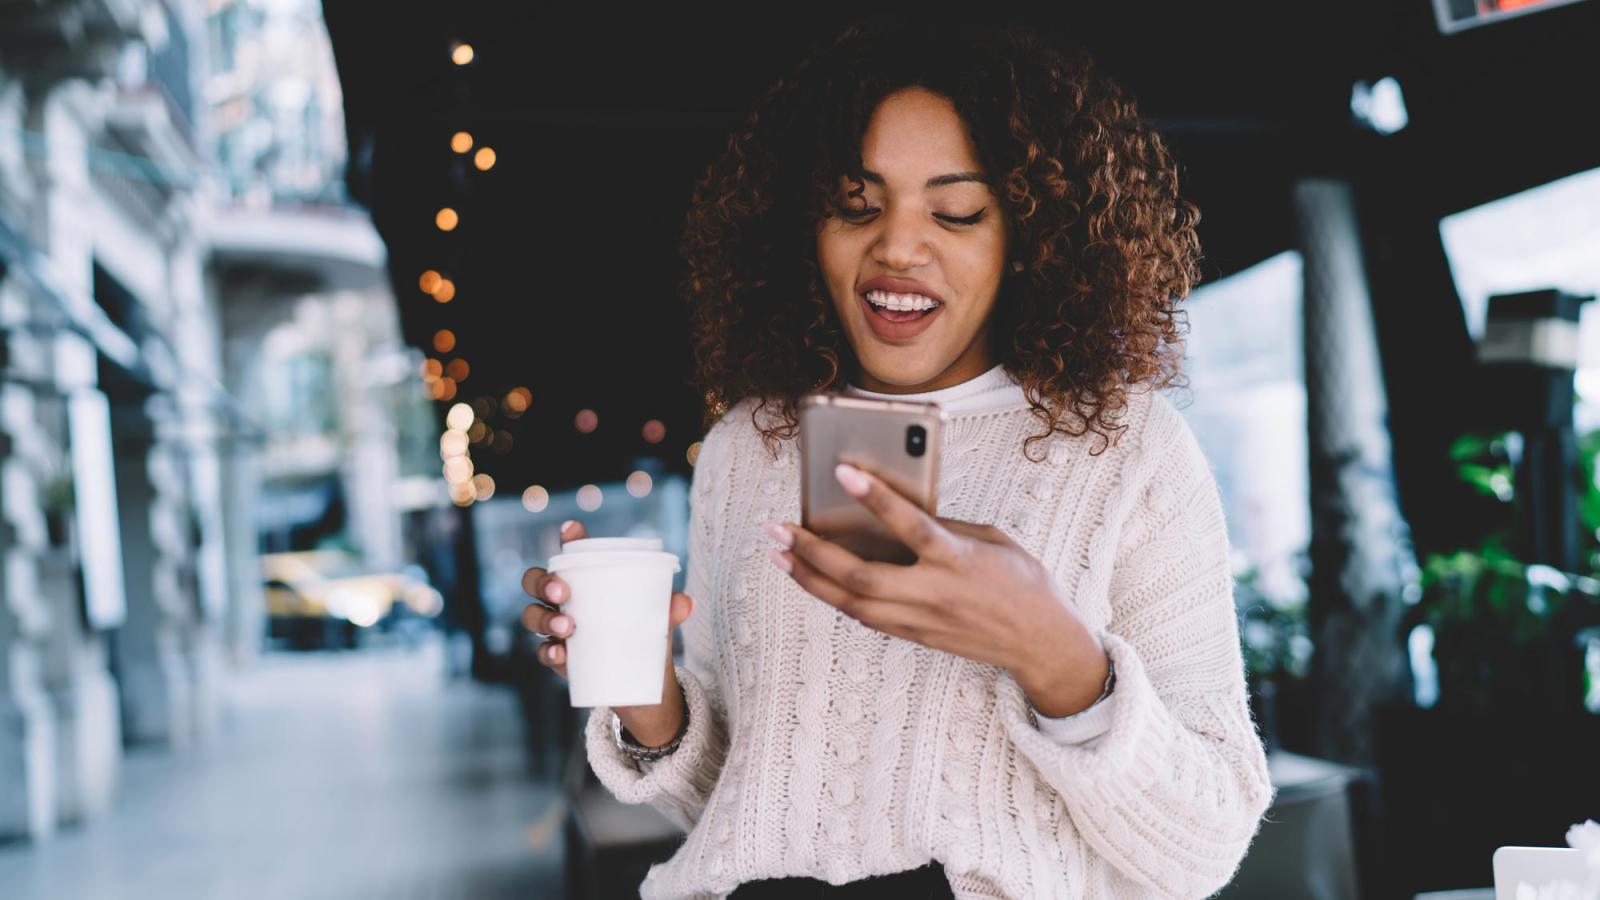 young woman with braces holding a coffee cup and looking at her phone